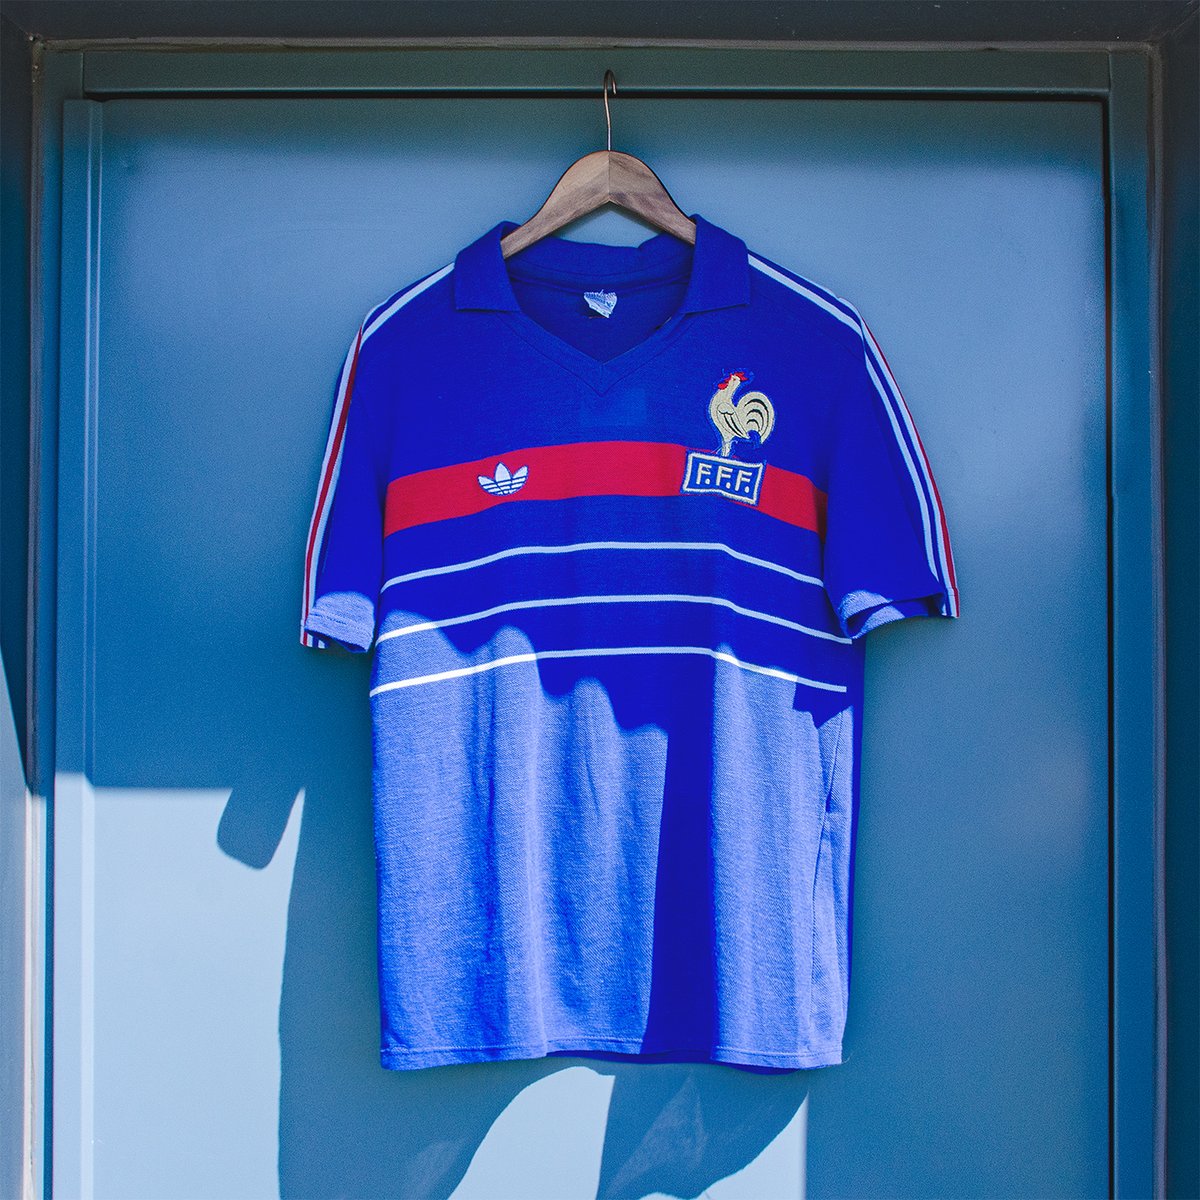 The red chest stripe on the new France home kit immediately got us thinking about Euro '84 and France '98Is this a future classic? #France #Nikefootball